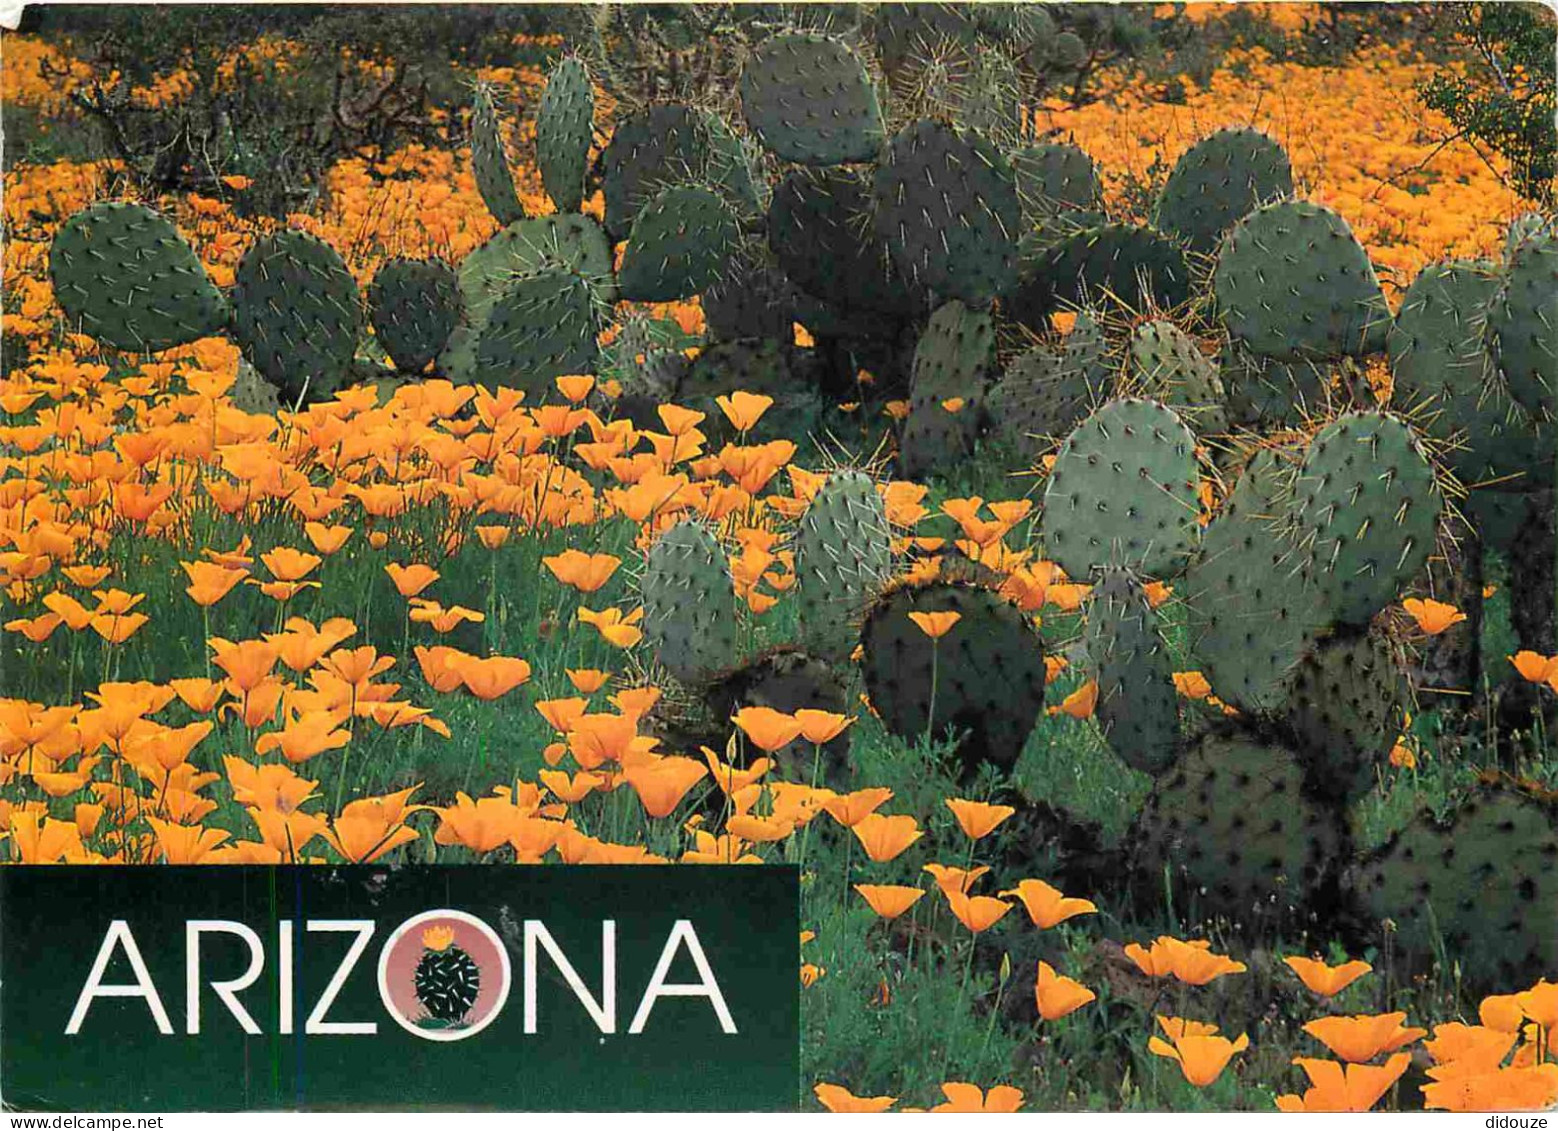 Fleurs - Plantes - Cactus - Arizona - A Blanket Of Mexican Goldpoppies Frame A Patch Ot Prickly Pear Cacti In Southern A - Cactus